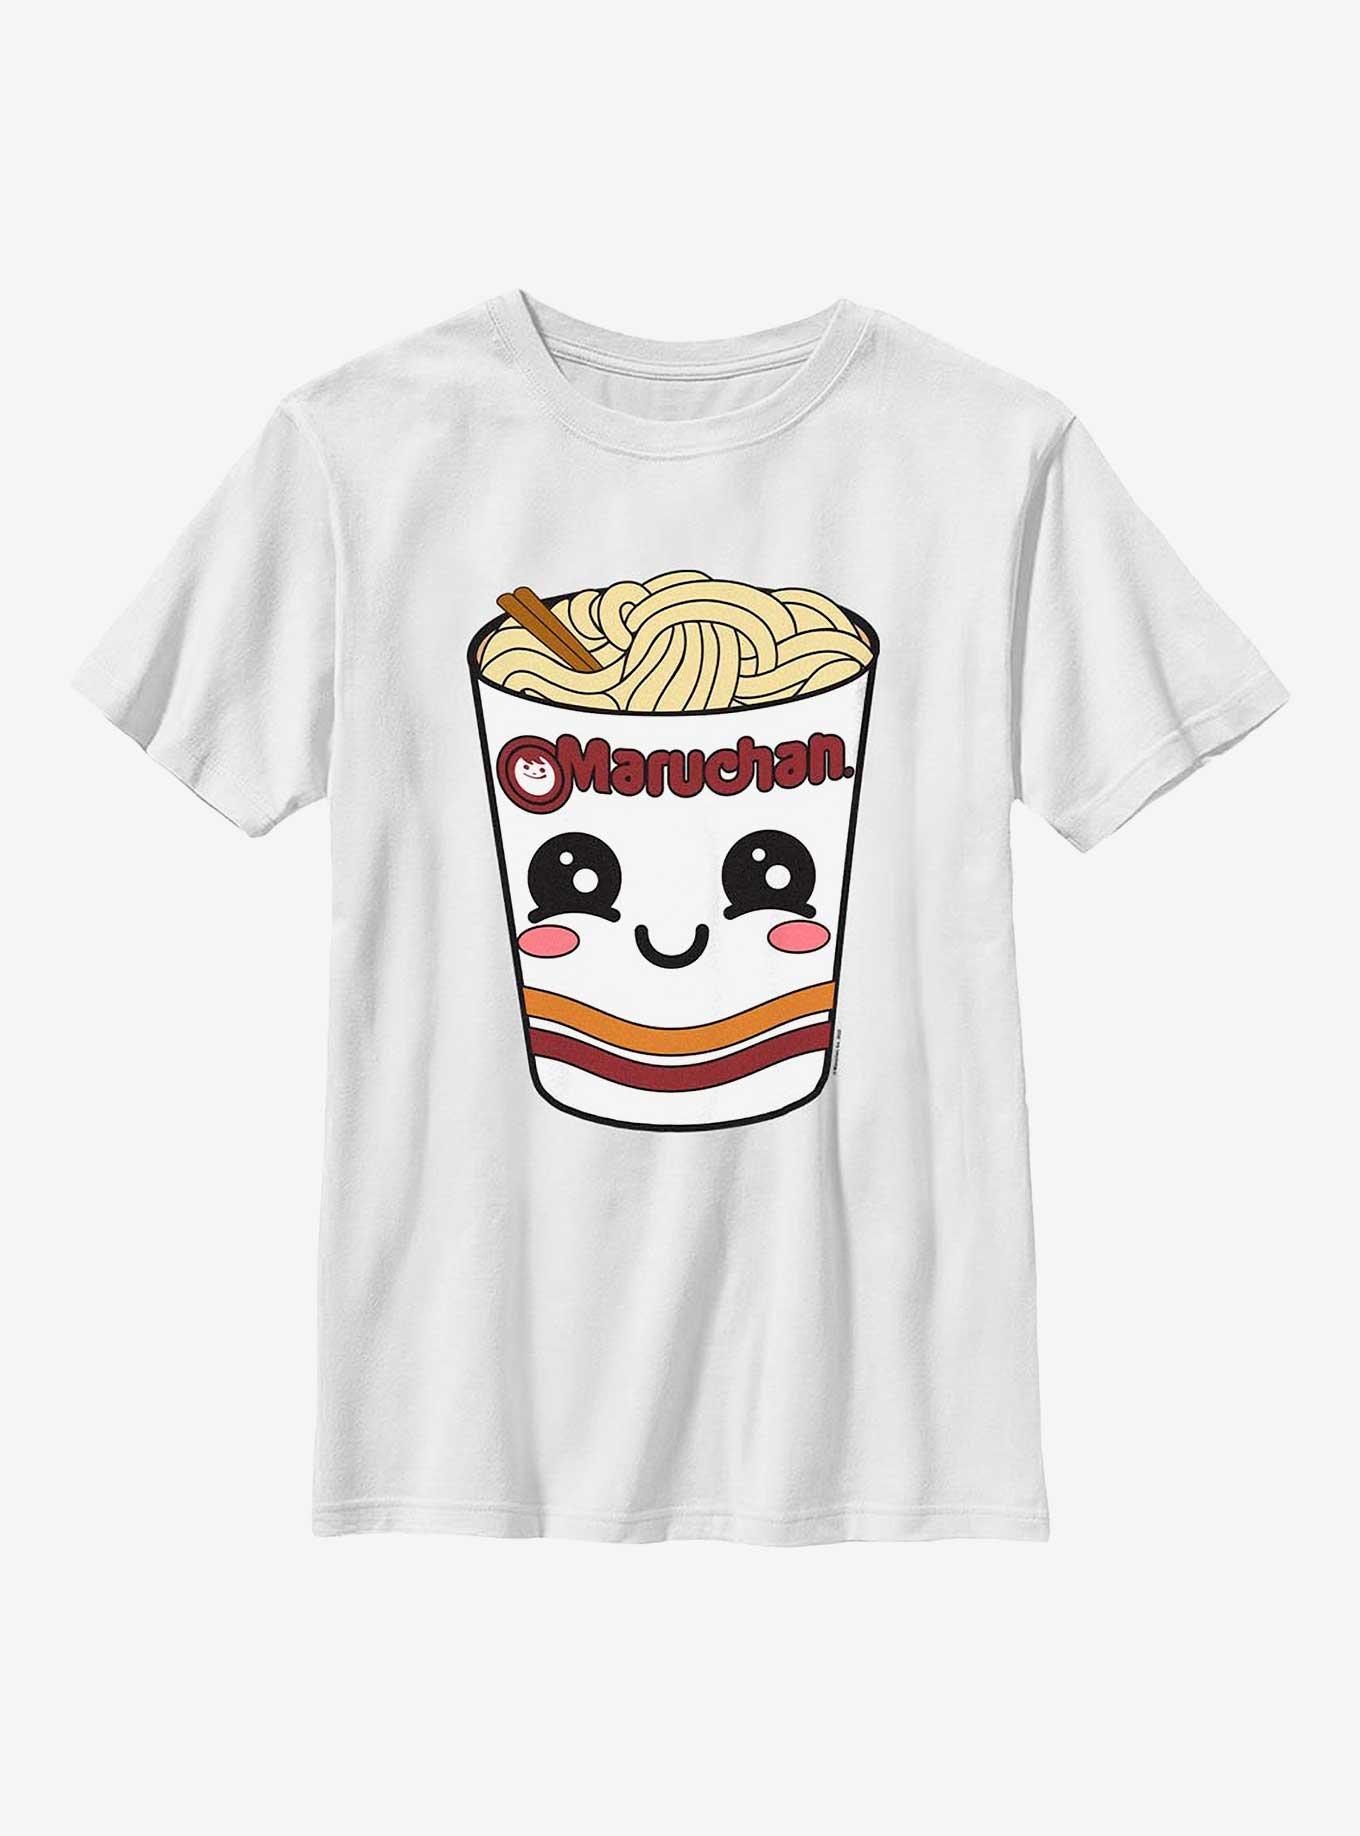 Maruchan Face Cup-8 Youth T-Shirt, WHITE, hi-res